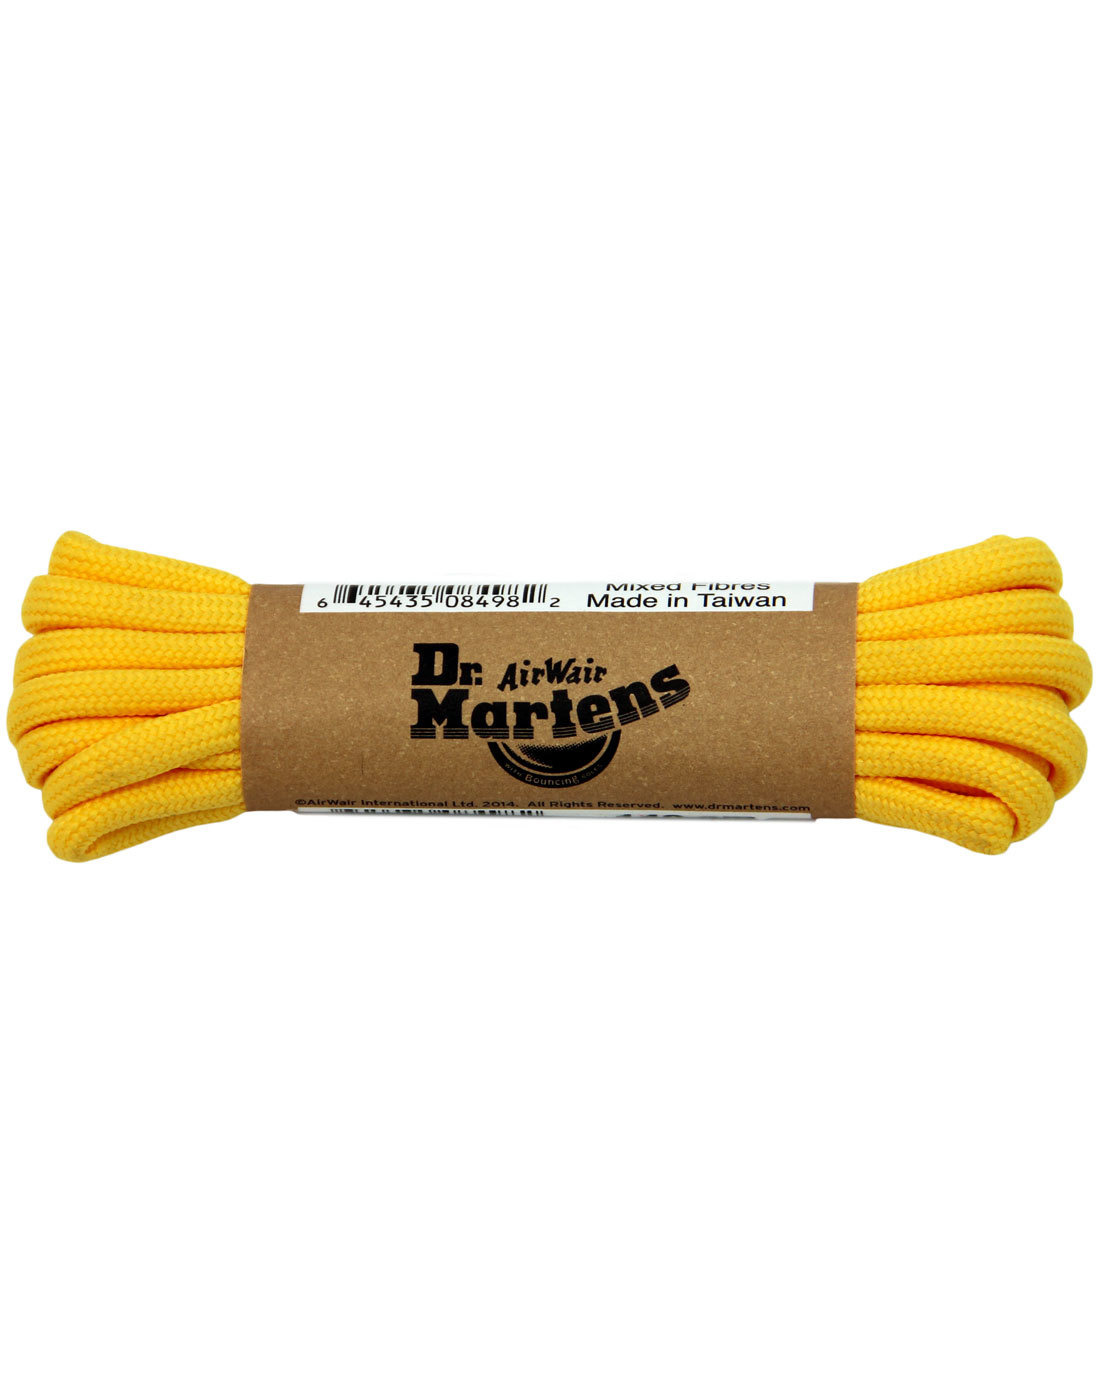 DR MARTENS Yellow Round 8 - 10 Eyelet Shoelaces